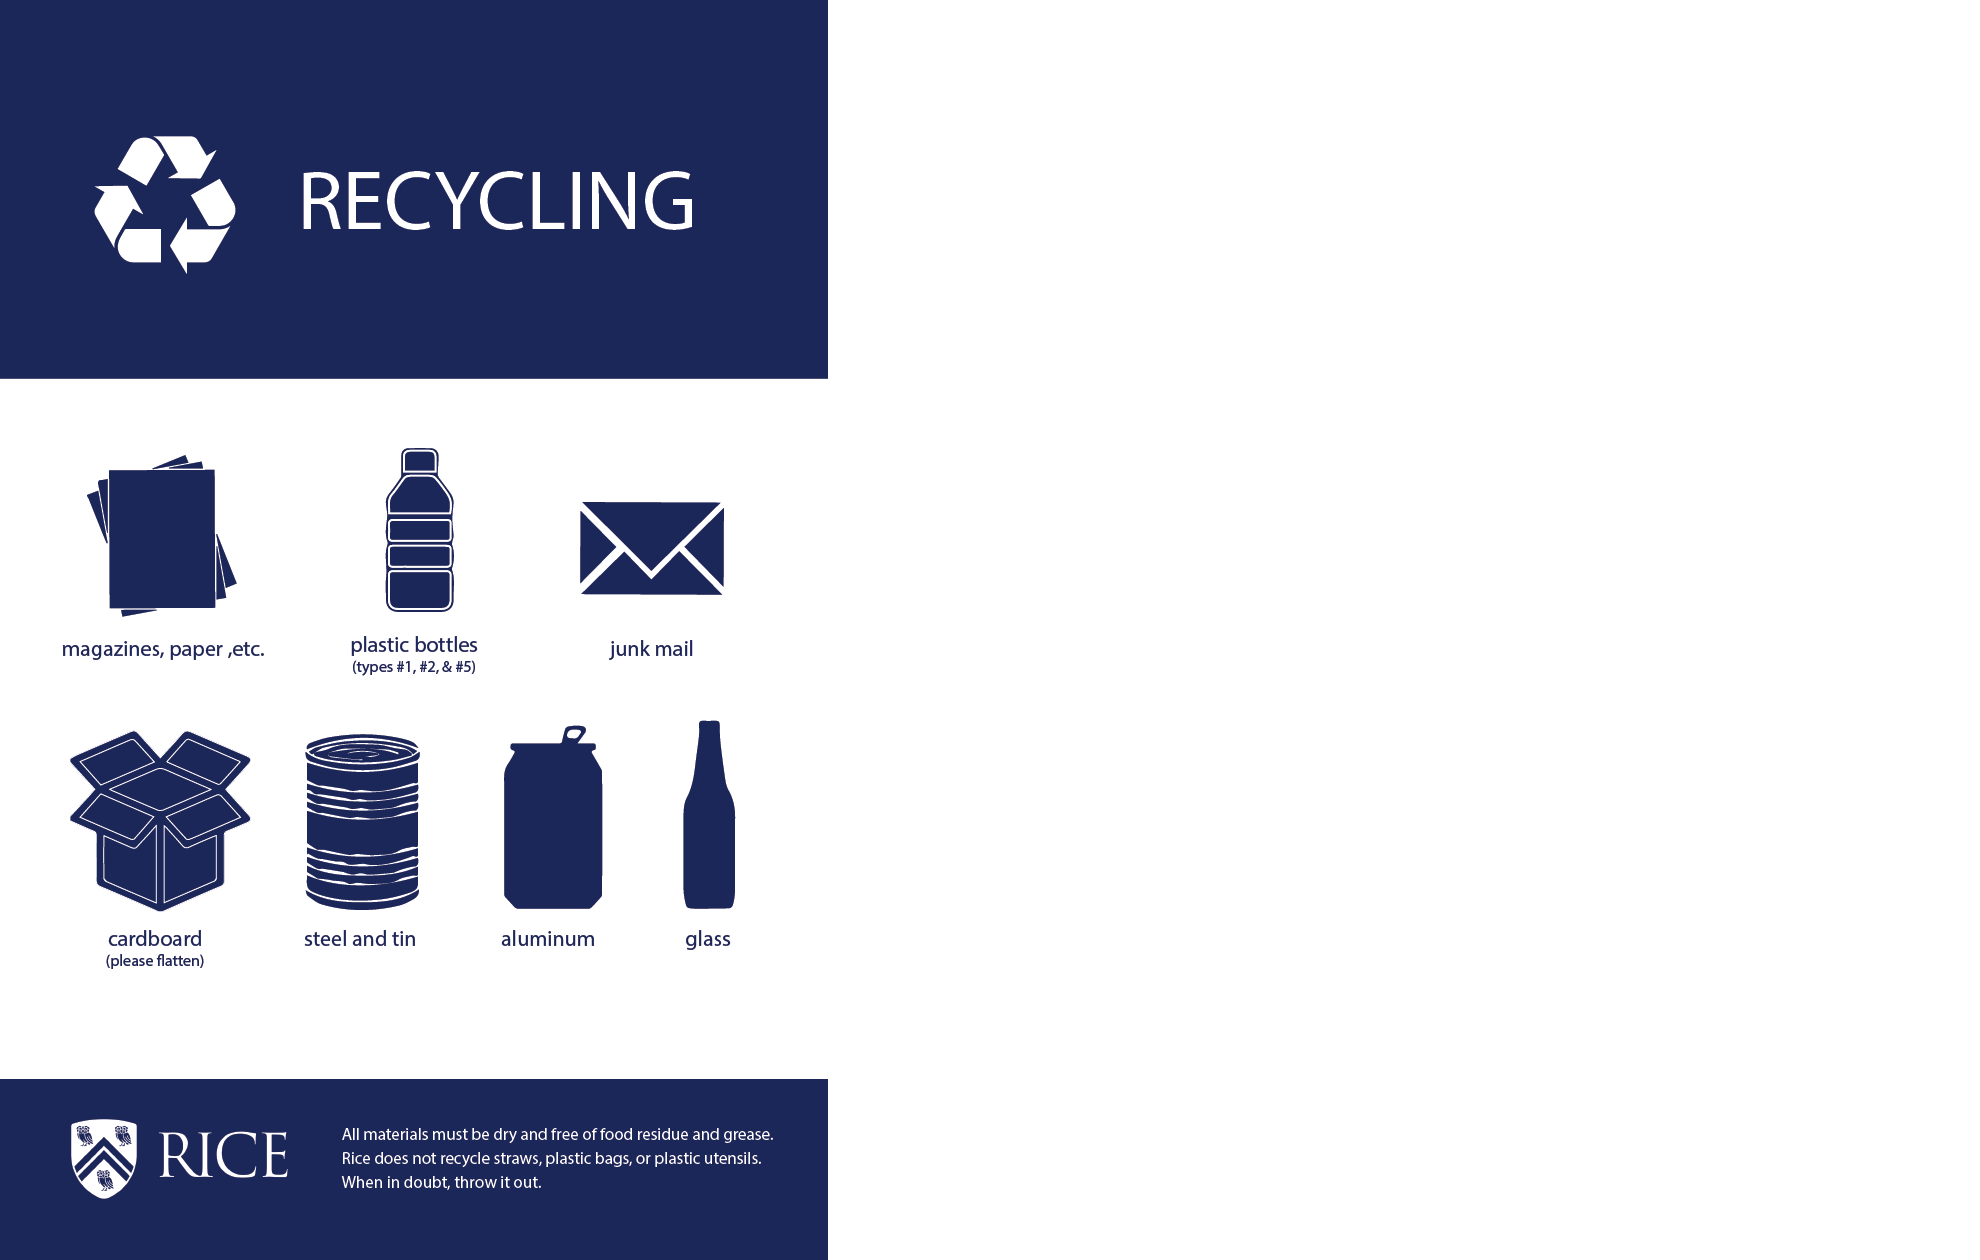 Recycling poster outlining what can be recycled at Rice University